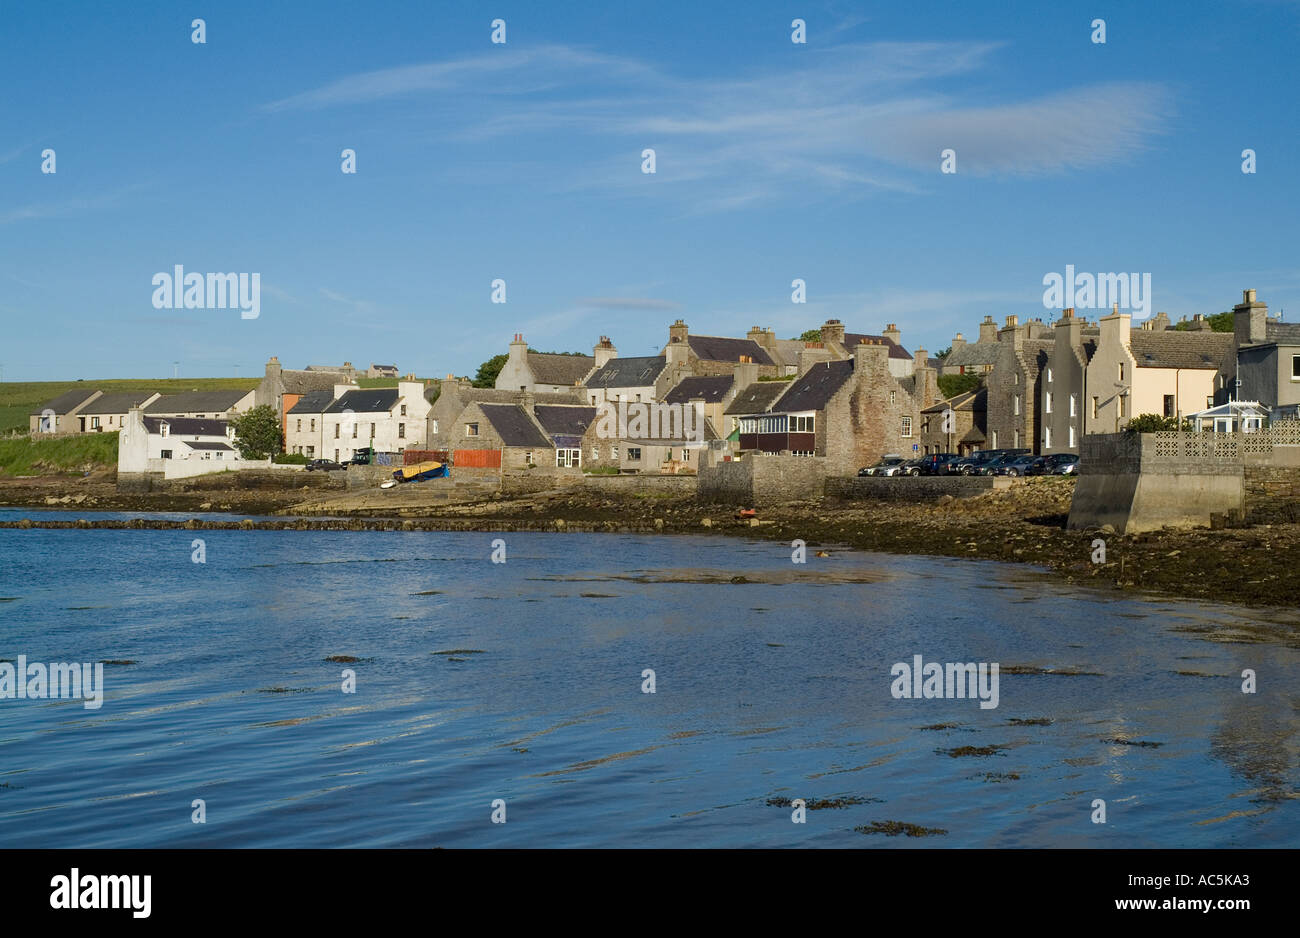 dh St Margarets Hope SOUTH RONALDSAY ORKNEY Waterfront quayside harbour houses town scotland village sea islands seafront scottish island community Stock Photo